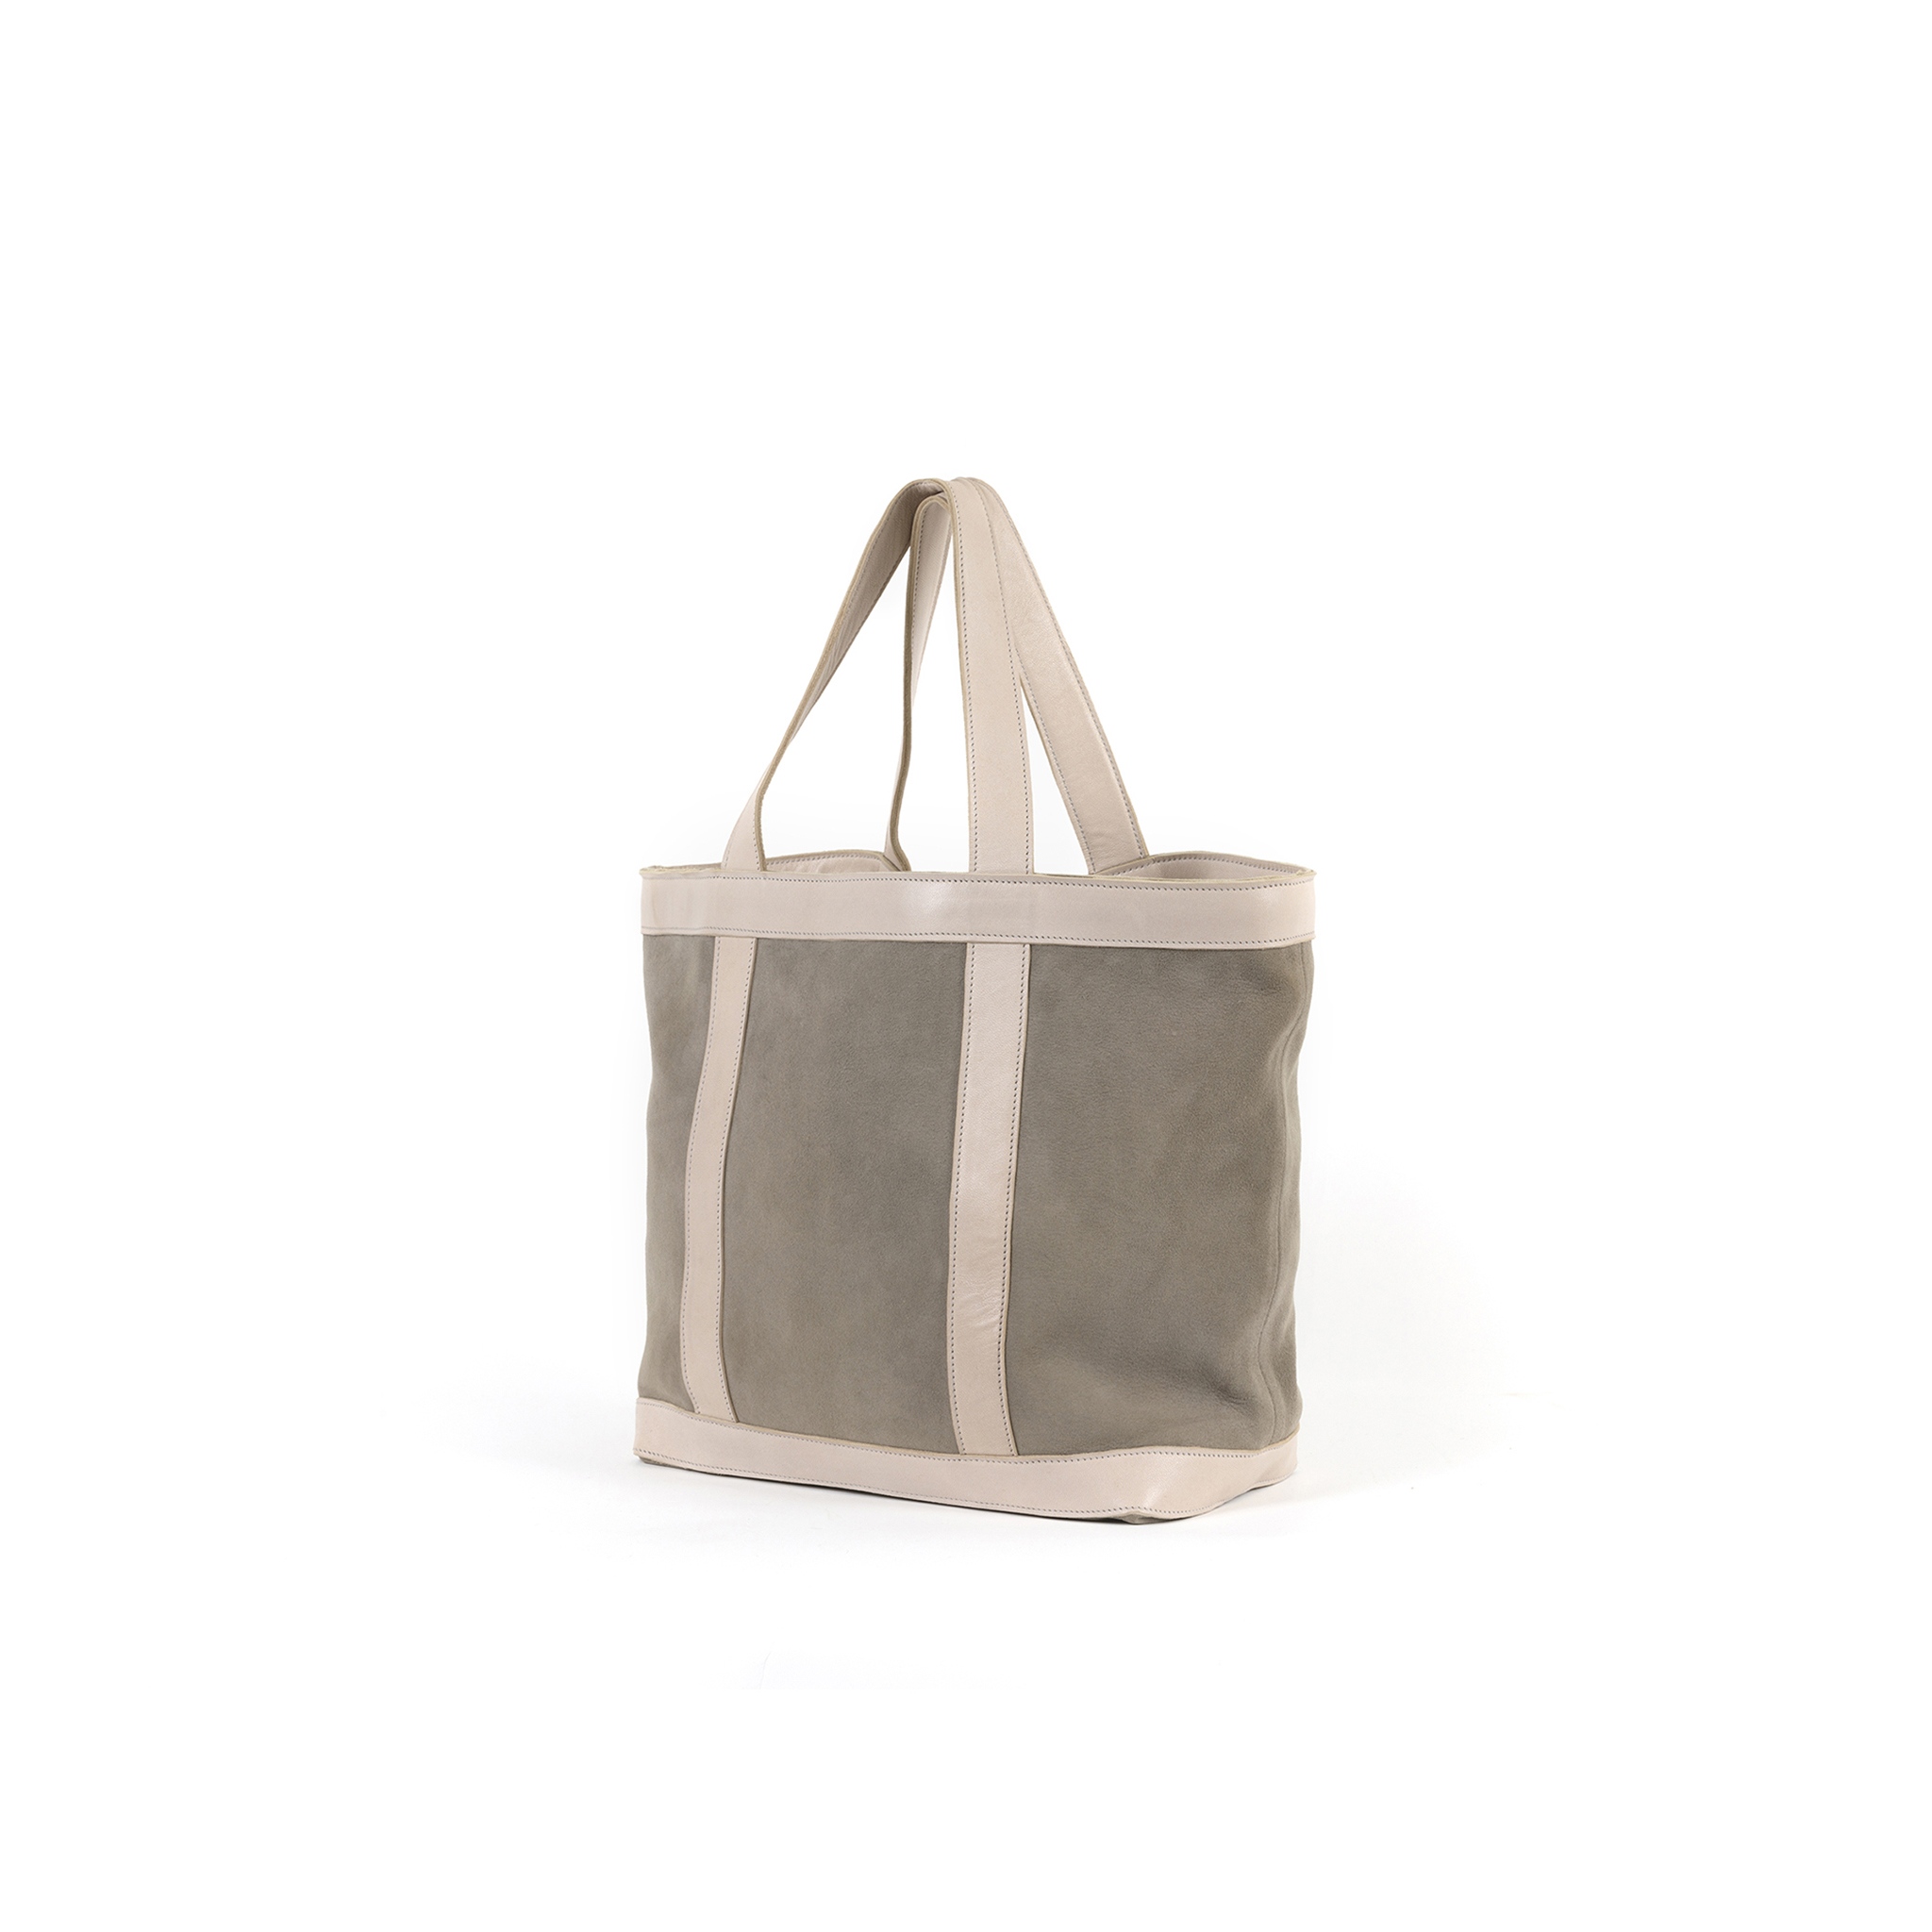 Shopping Bag - Glossy and suede leather - Grey color